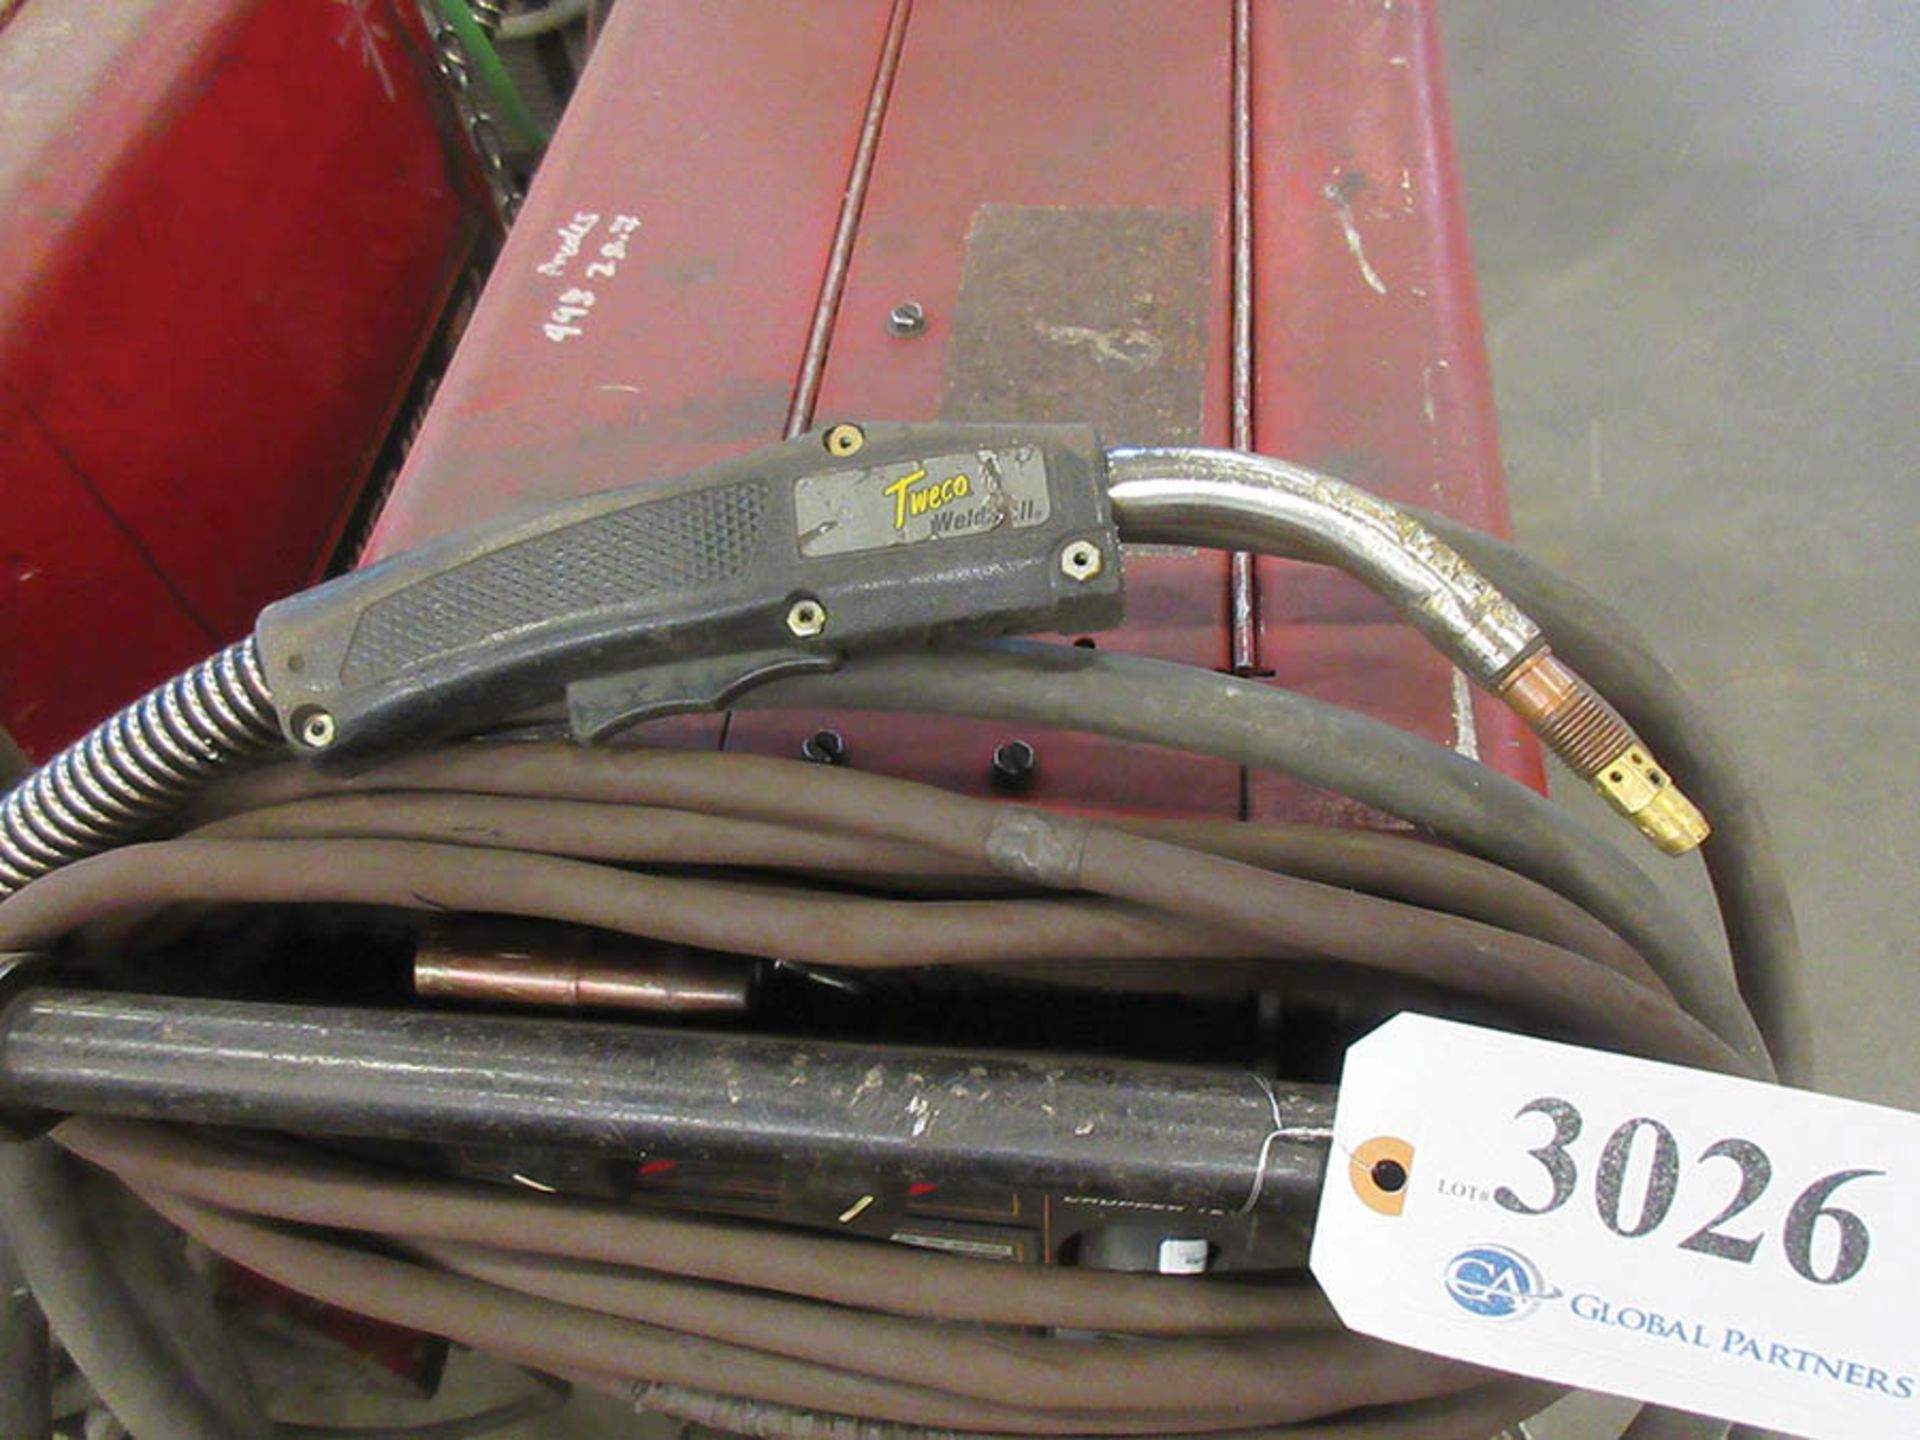 LINCOLN ELECTRIC 350MP POWER MIG WELDER WITH TWECO WELDSKILL MIG GUN, #88 - Image 3 of 3